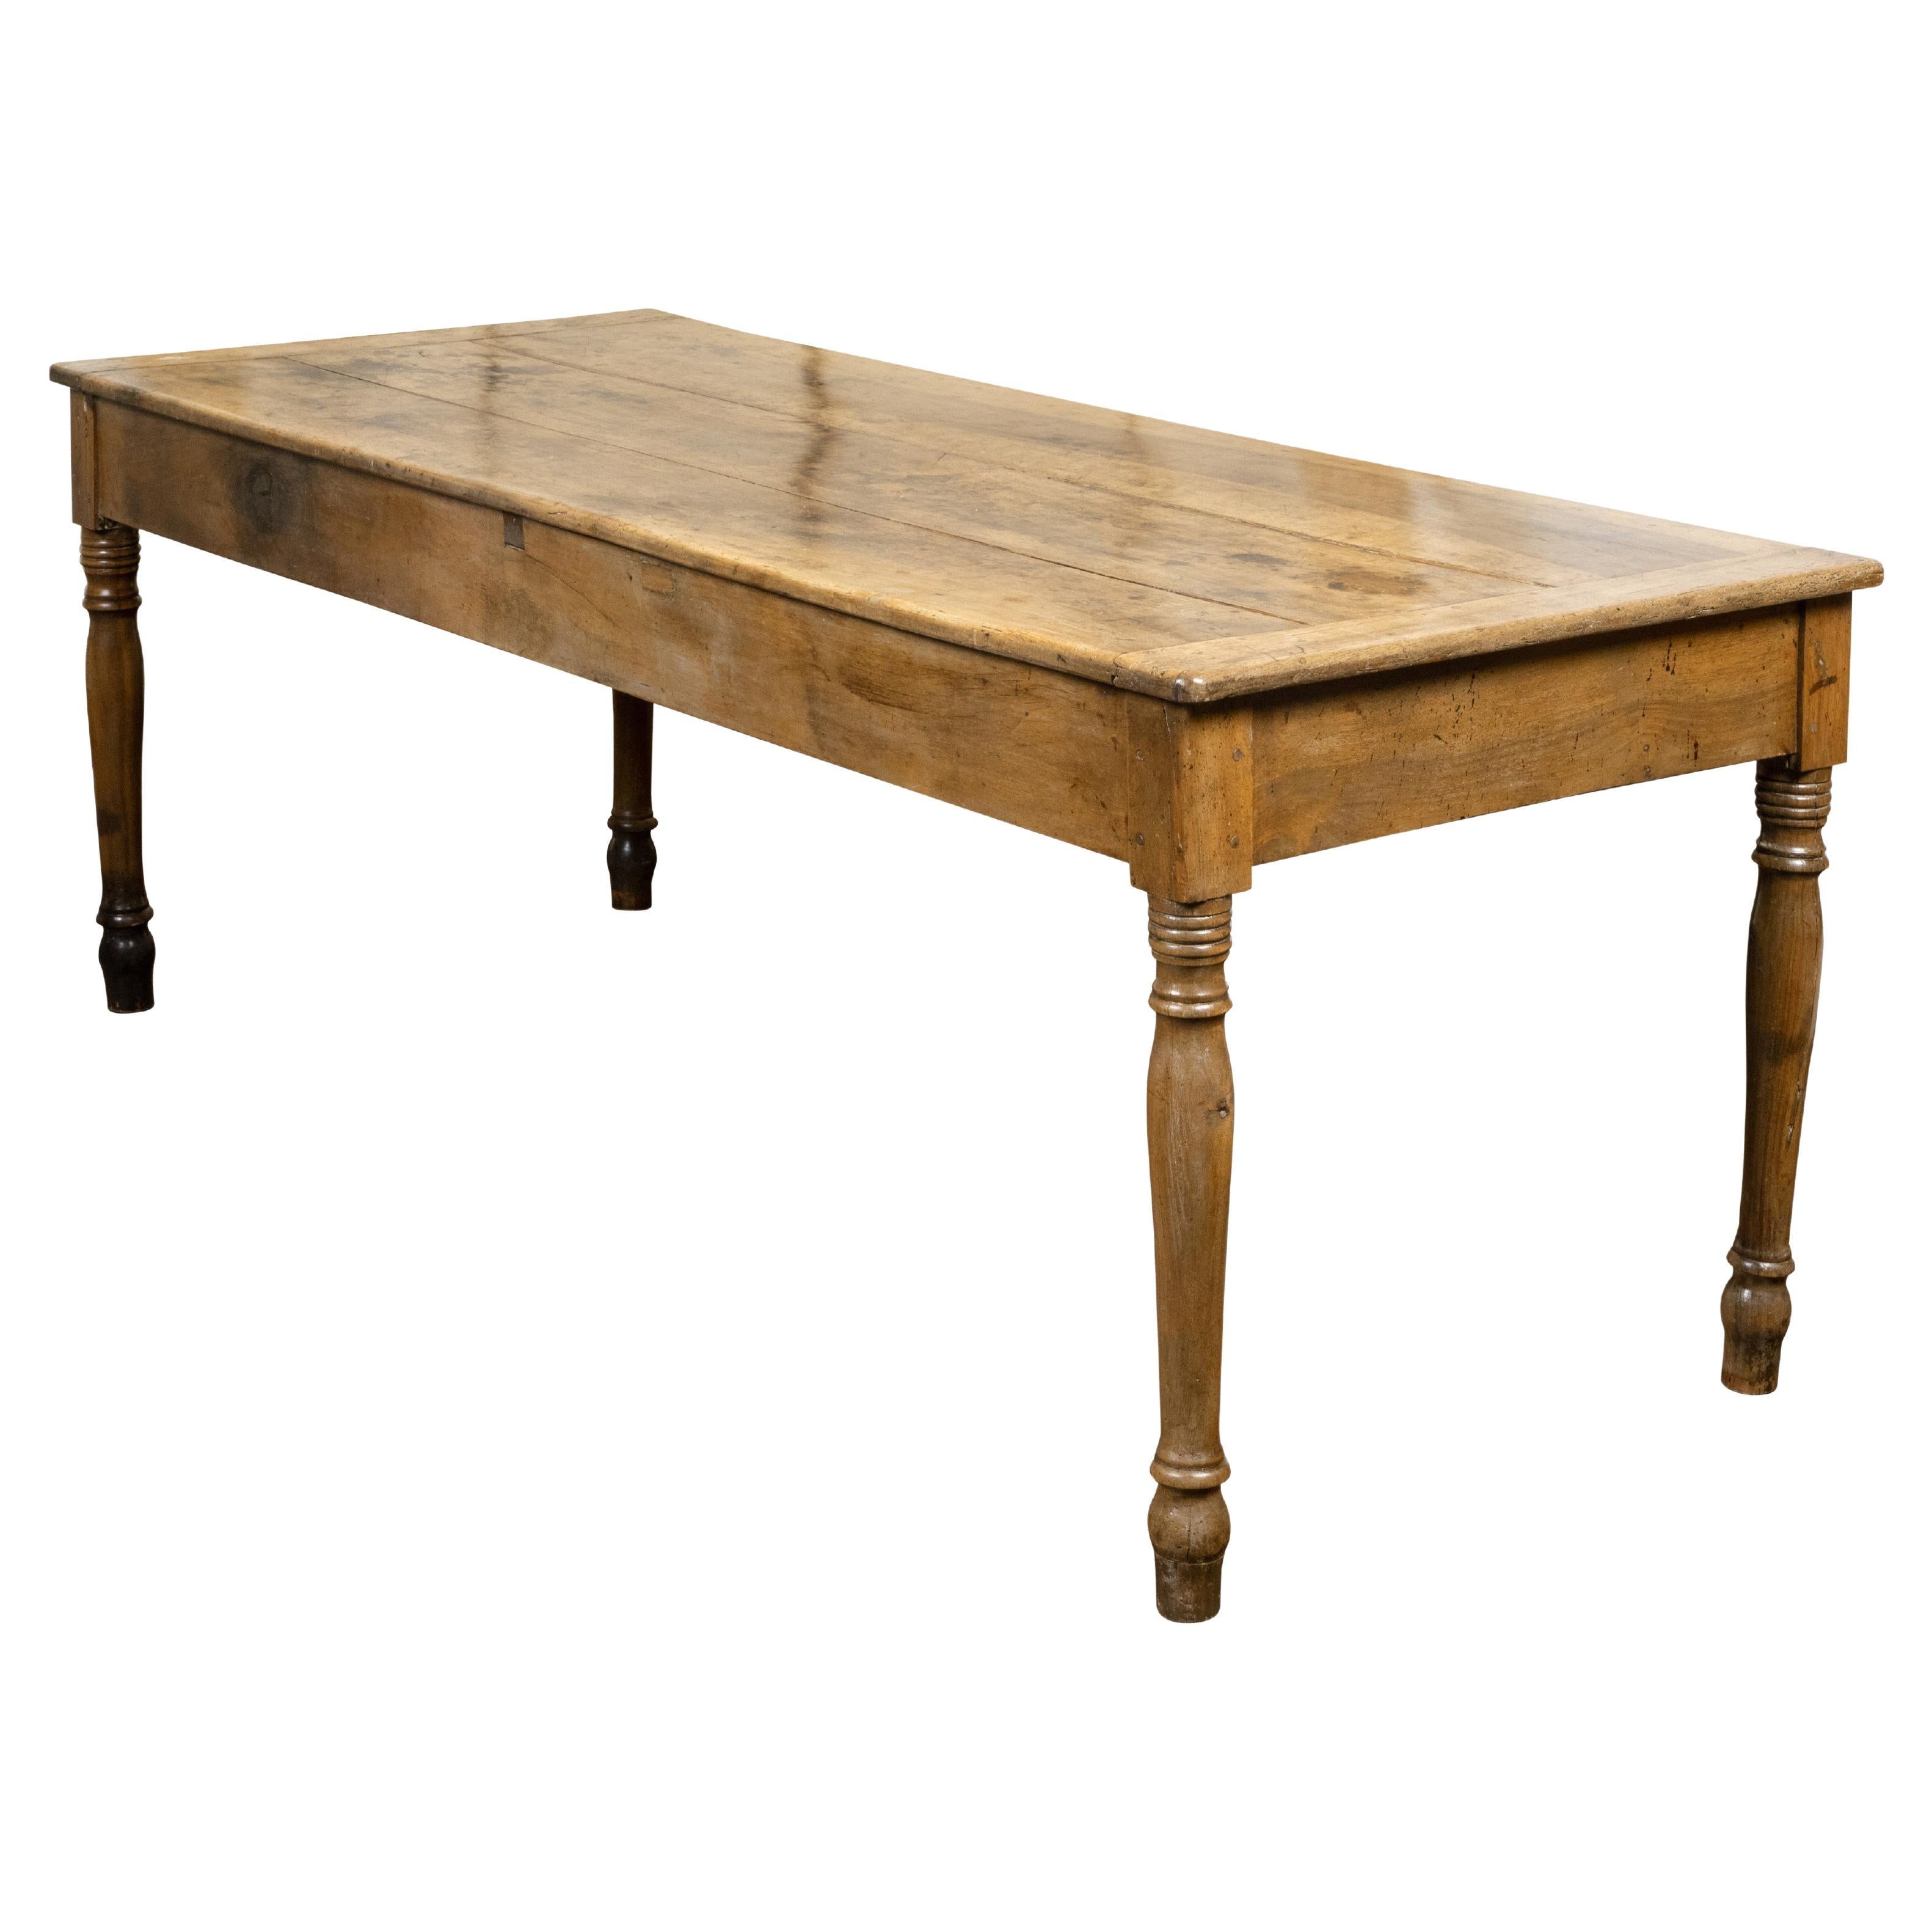 French 19th Century Walnut Farm Table with Turned Legs and Distressed Patina